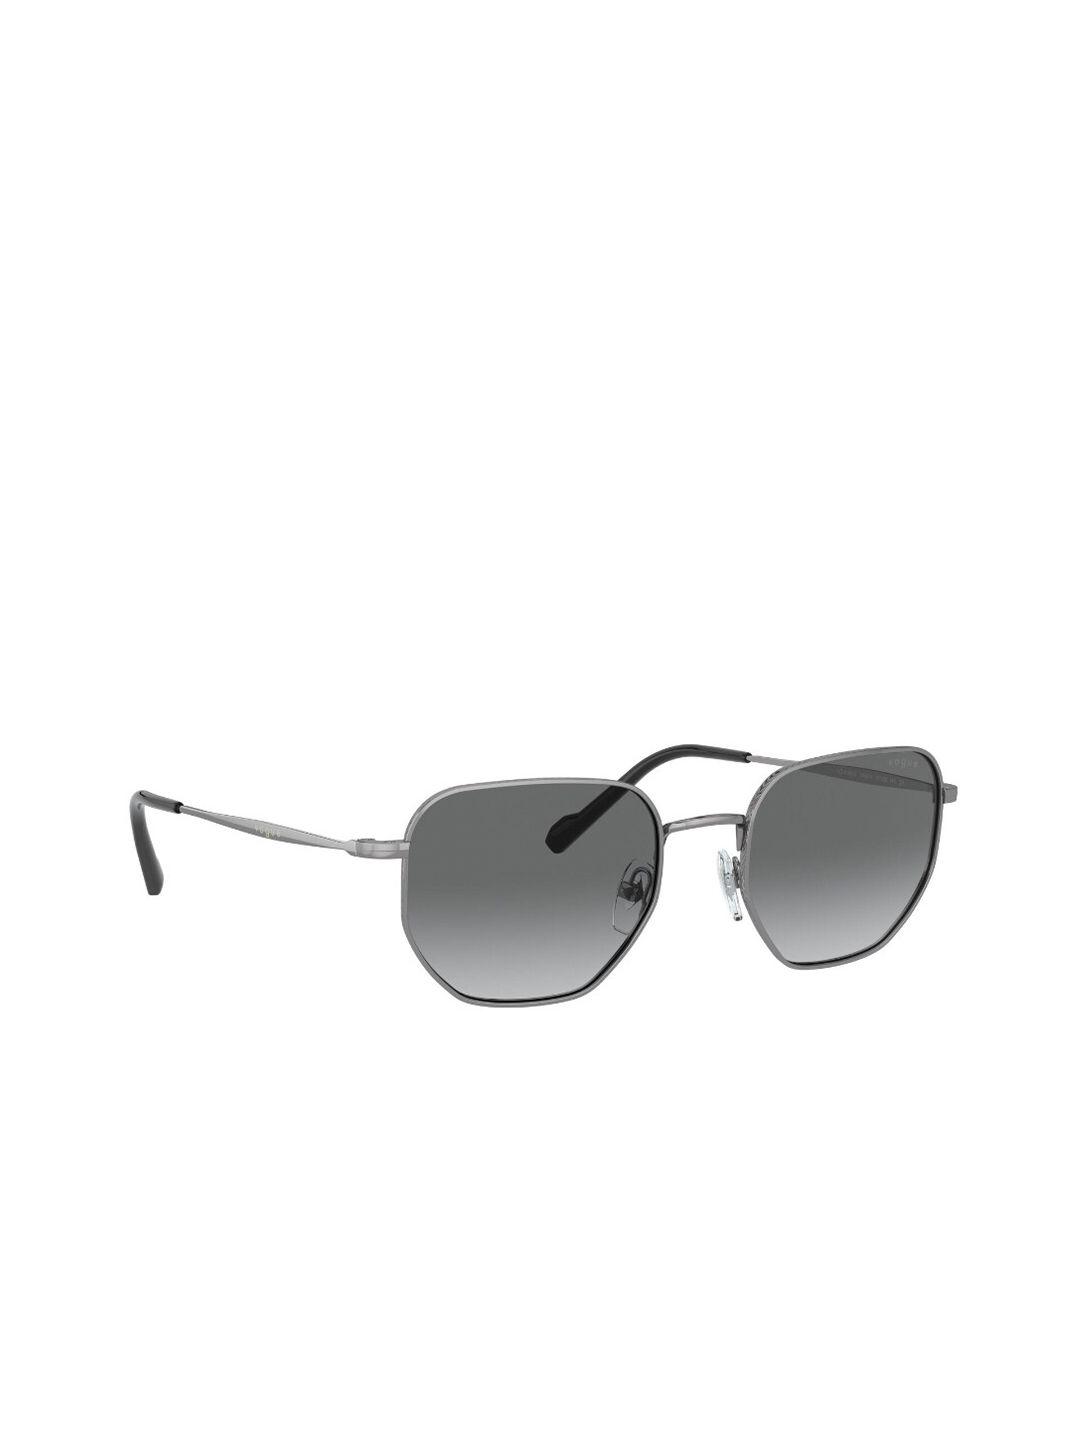 vogue men oversized sunglasses with uv protected lens 8056597340359